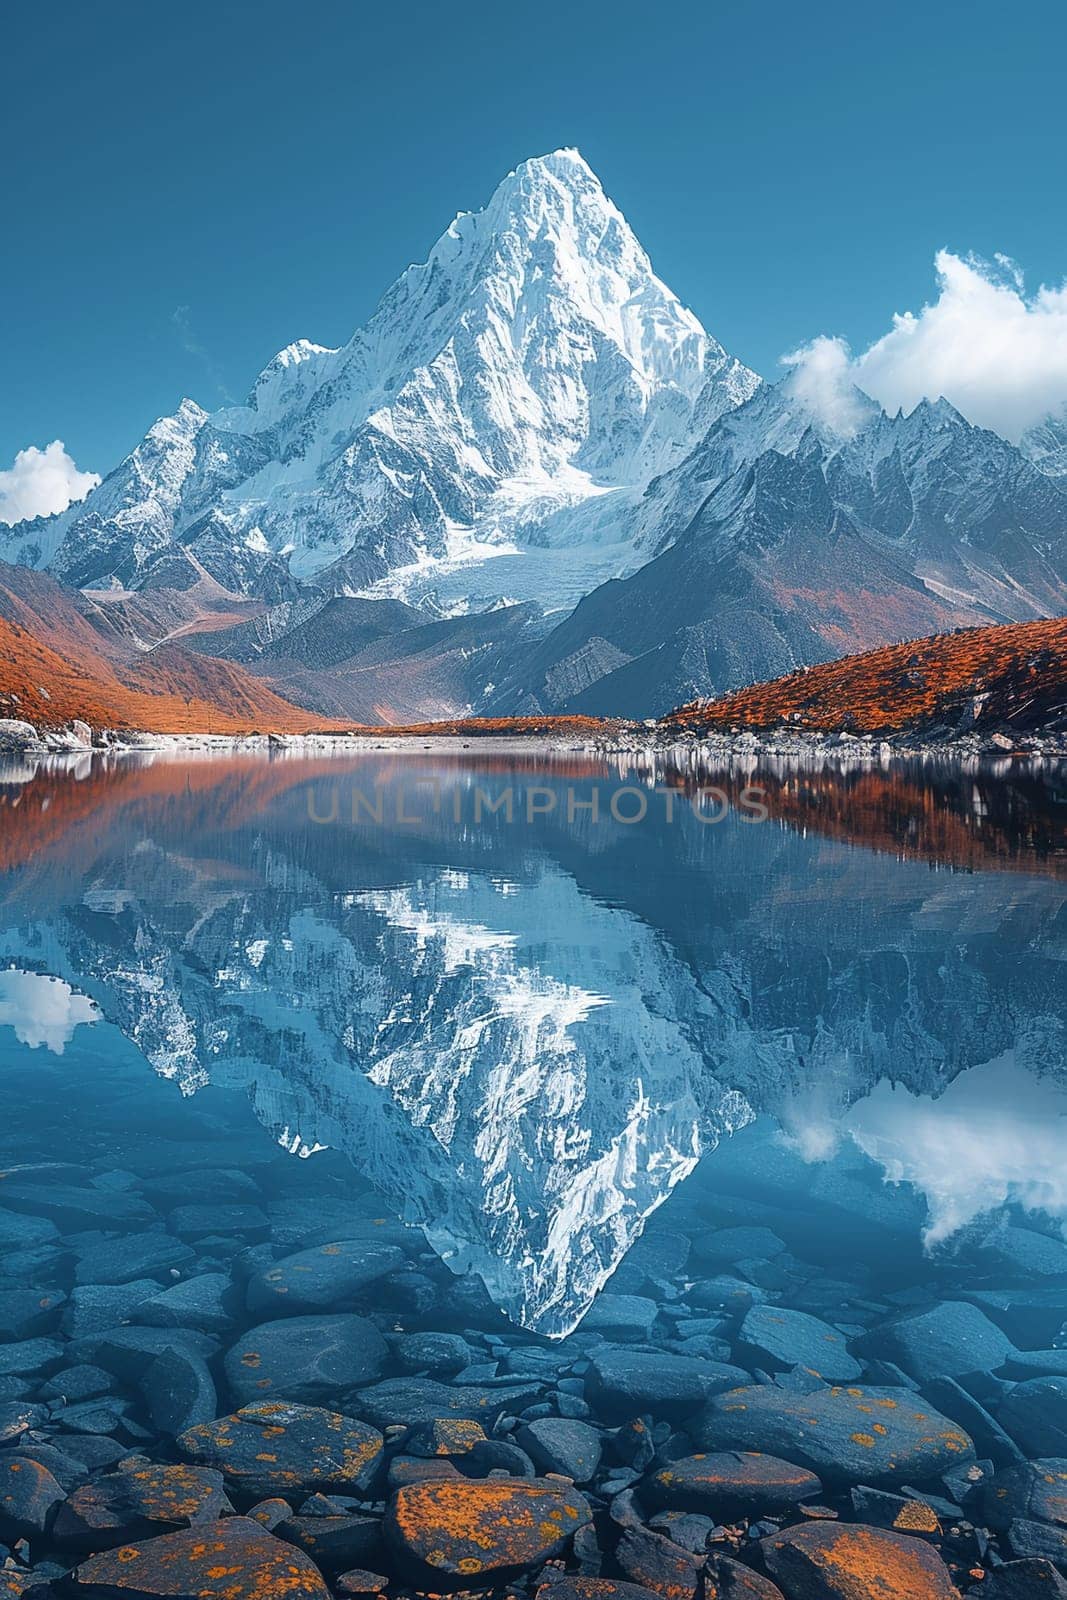 A snow-capped mountain reflected in a crystal-clear lake, symbolizing serene natural beauty.